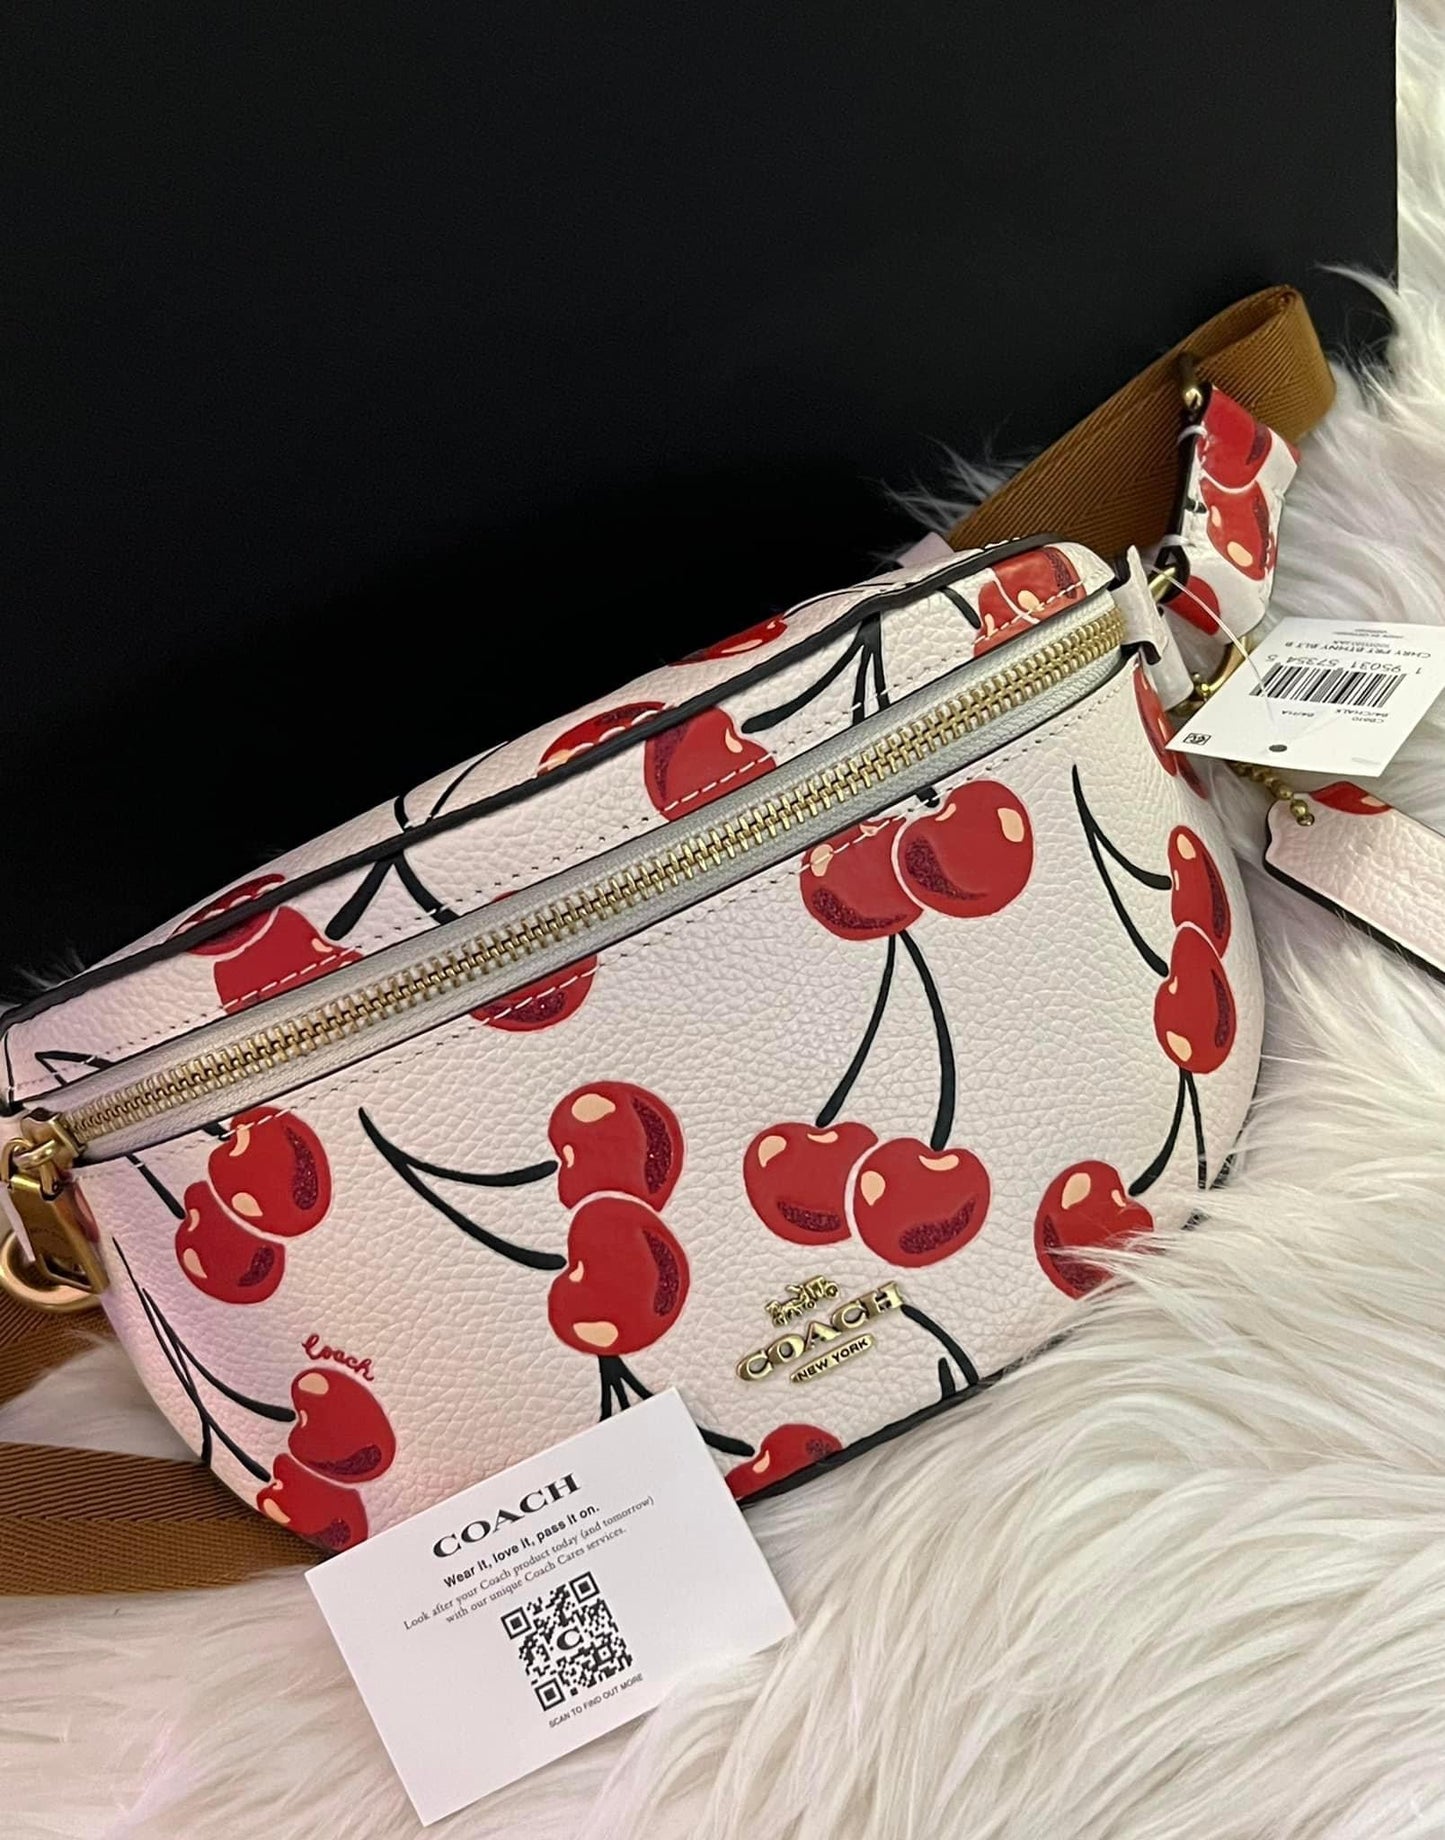 Coach Bethany Belt Bag with Cherry Print